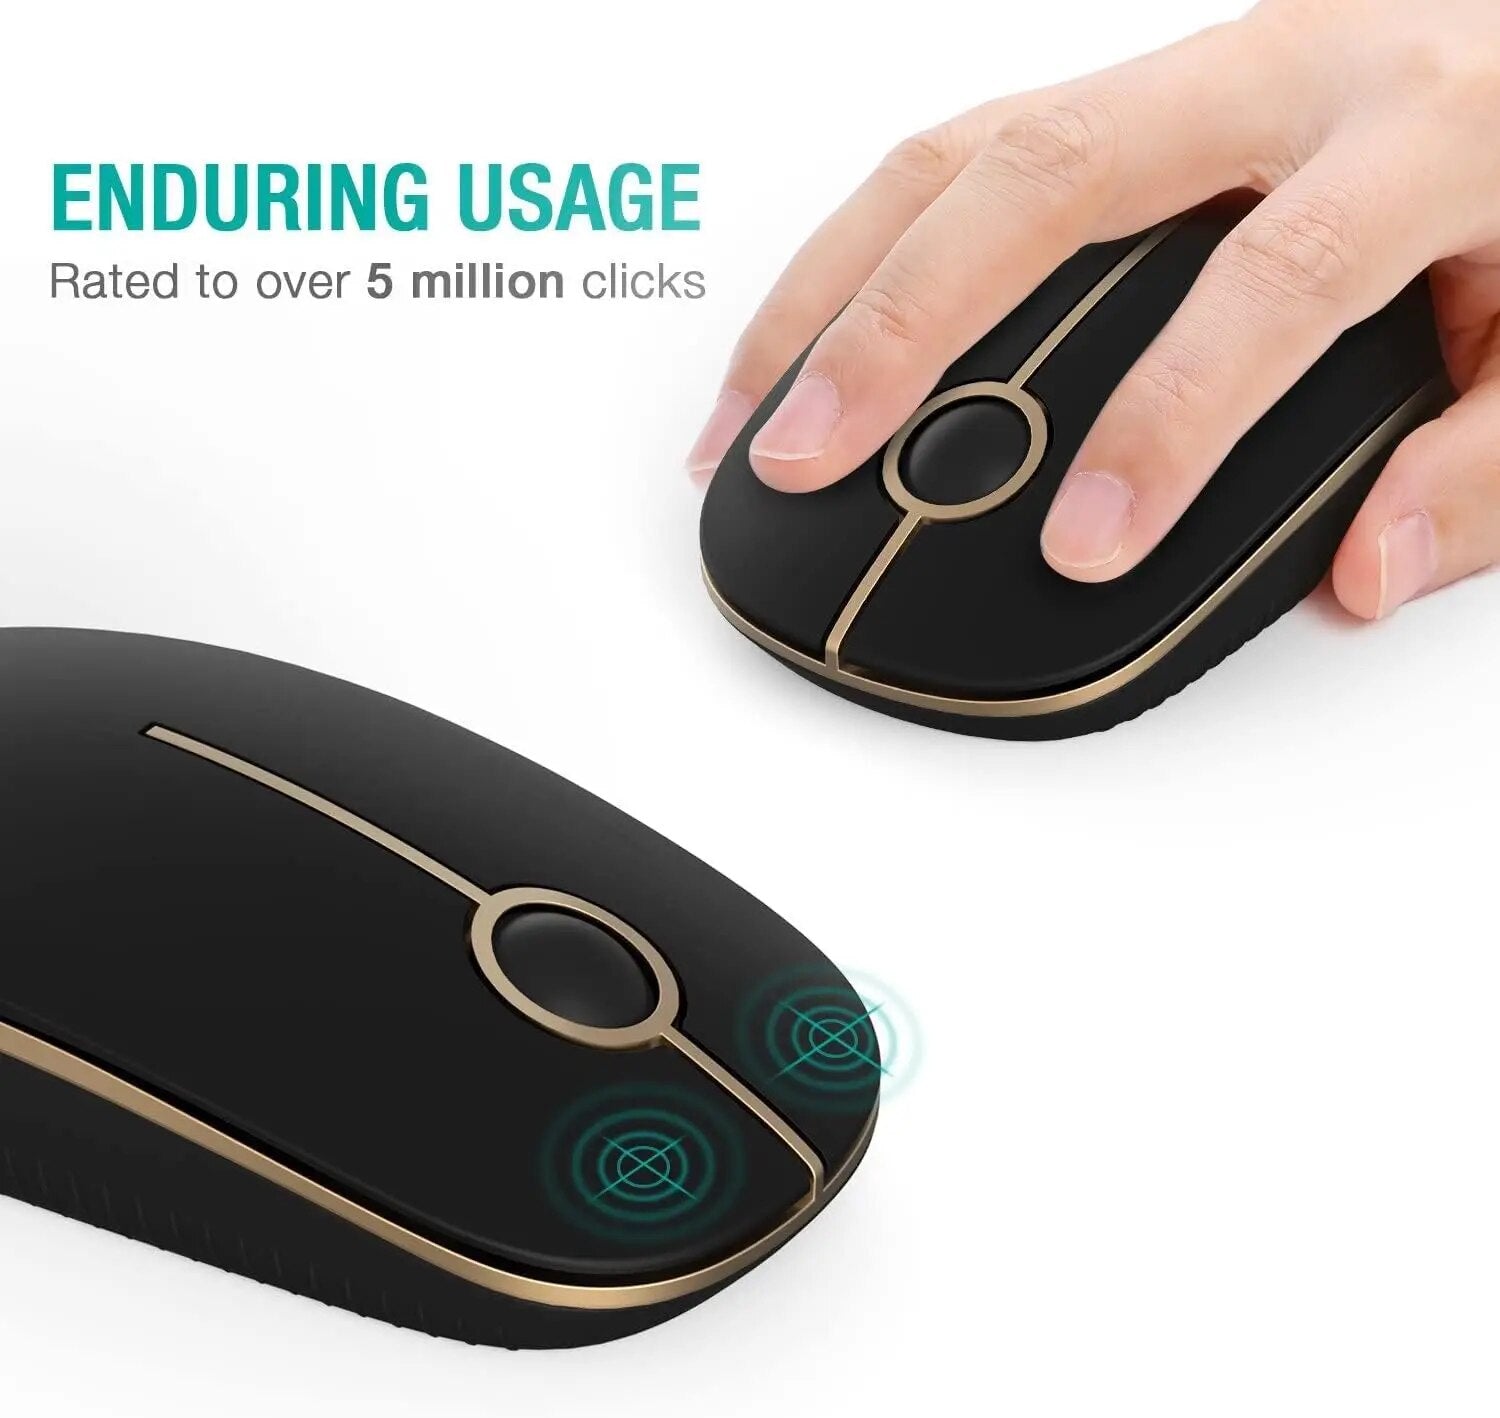 MS001 2.4G Wireless Mouse for PC